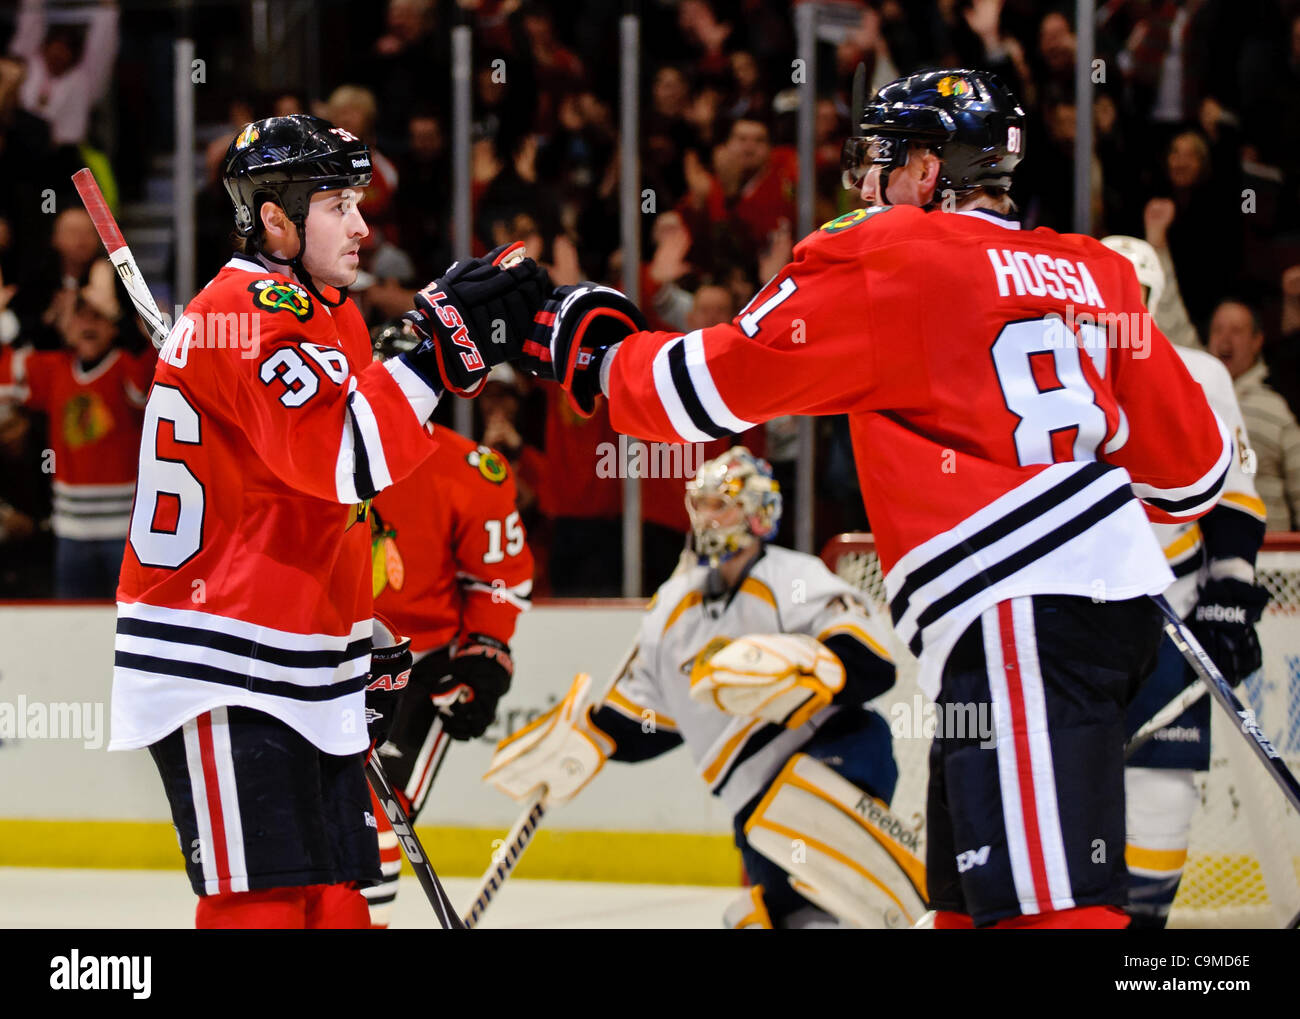 Jan. 24, 2012 - Chicago, Illinois, U.S - Chicago center Dave Bolland (36) is congratulated by right wing Marian Hossa (81) after his 3rd period goal during the NHL game between the Chicago Blackhawks and the Nashville Predators at the United Center in Chicago, IL. The Predators defeated the Blackhaw Stock Photo